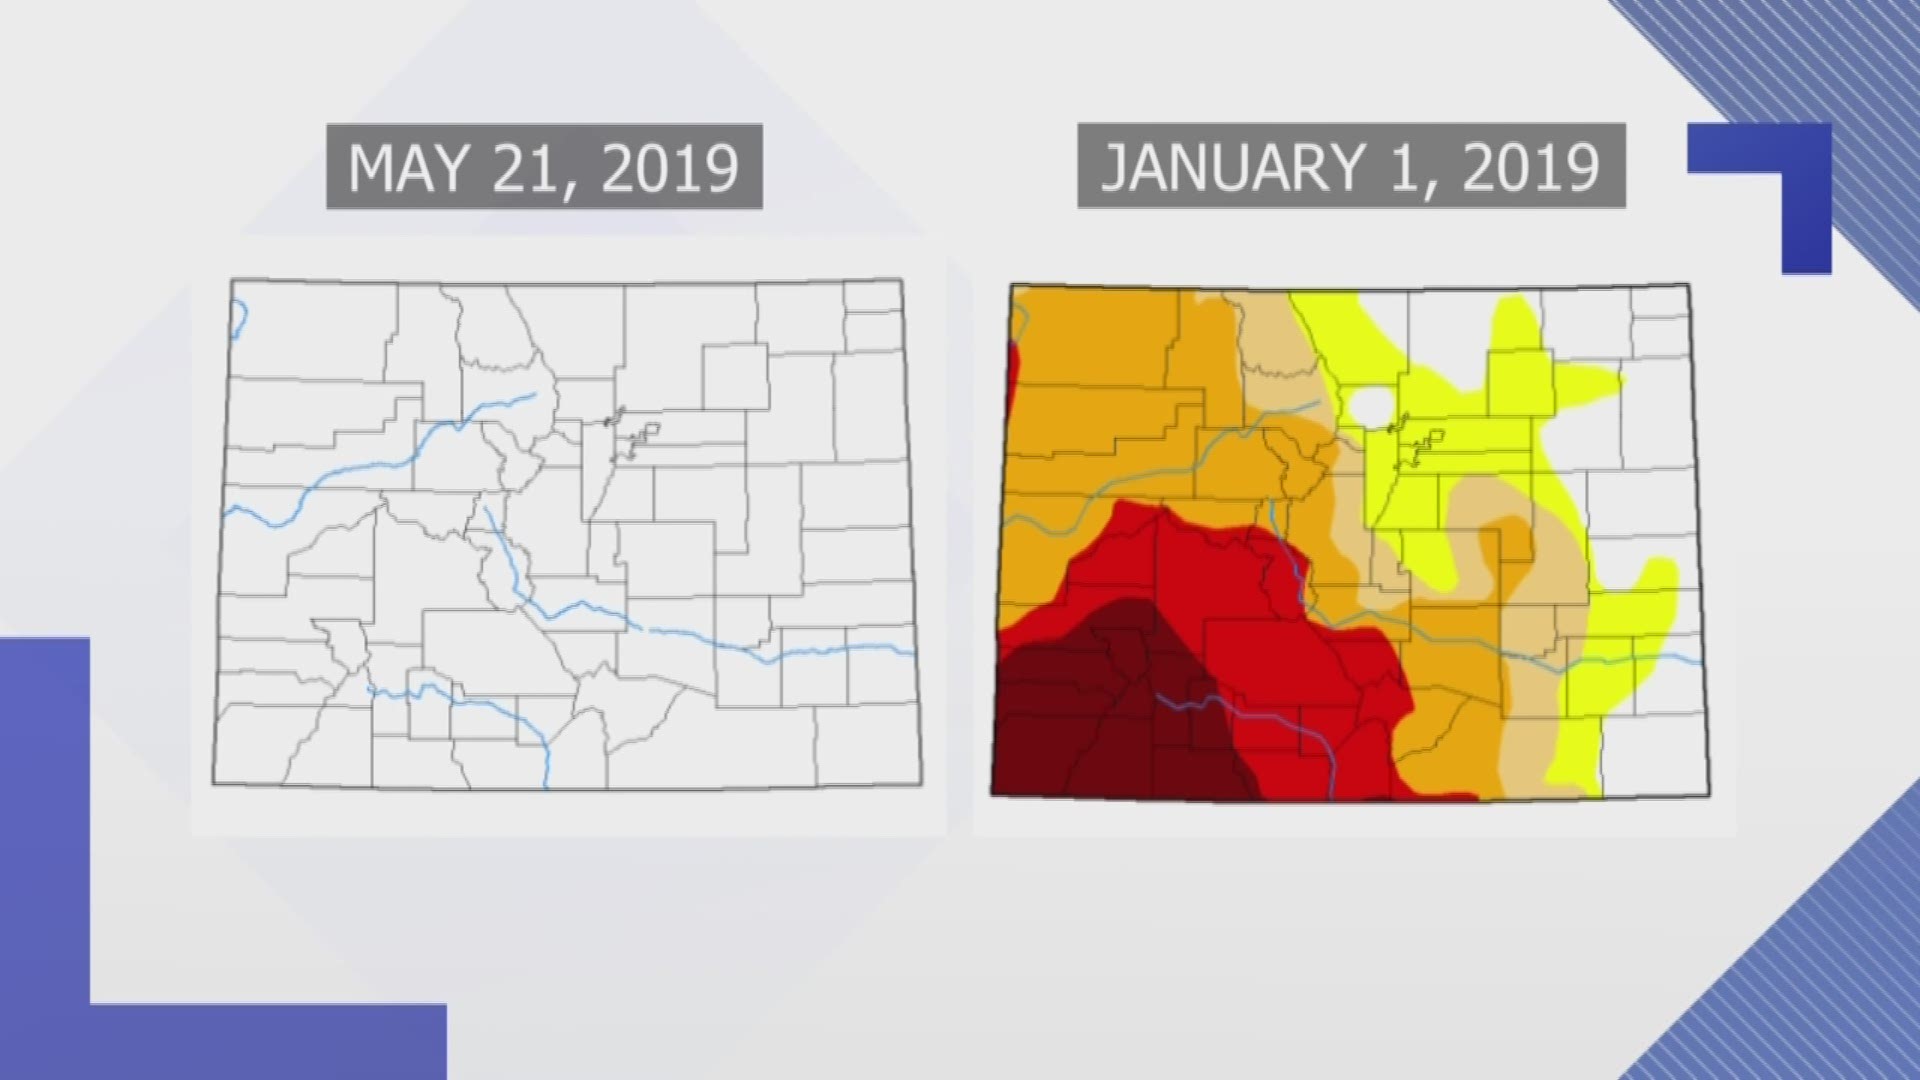 The drought monitor shows there are no drought conditions in Colorado. Only .01% of Colorado is currently abnormally dry.